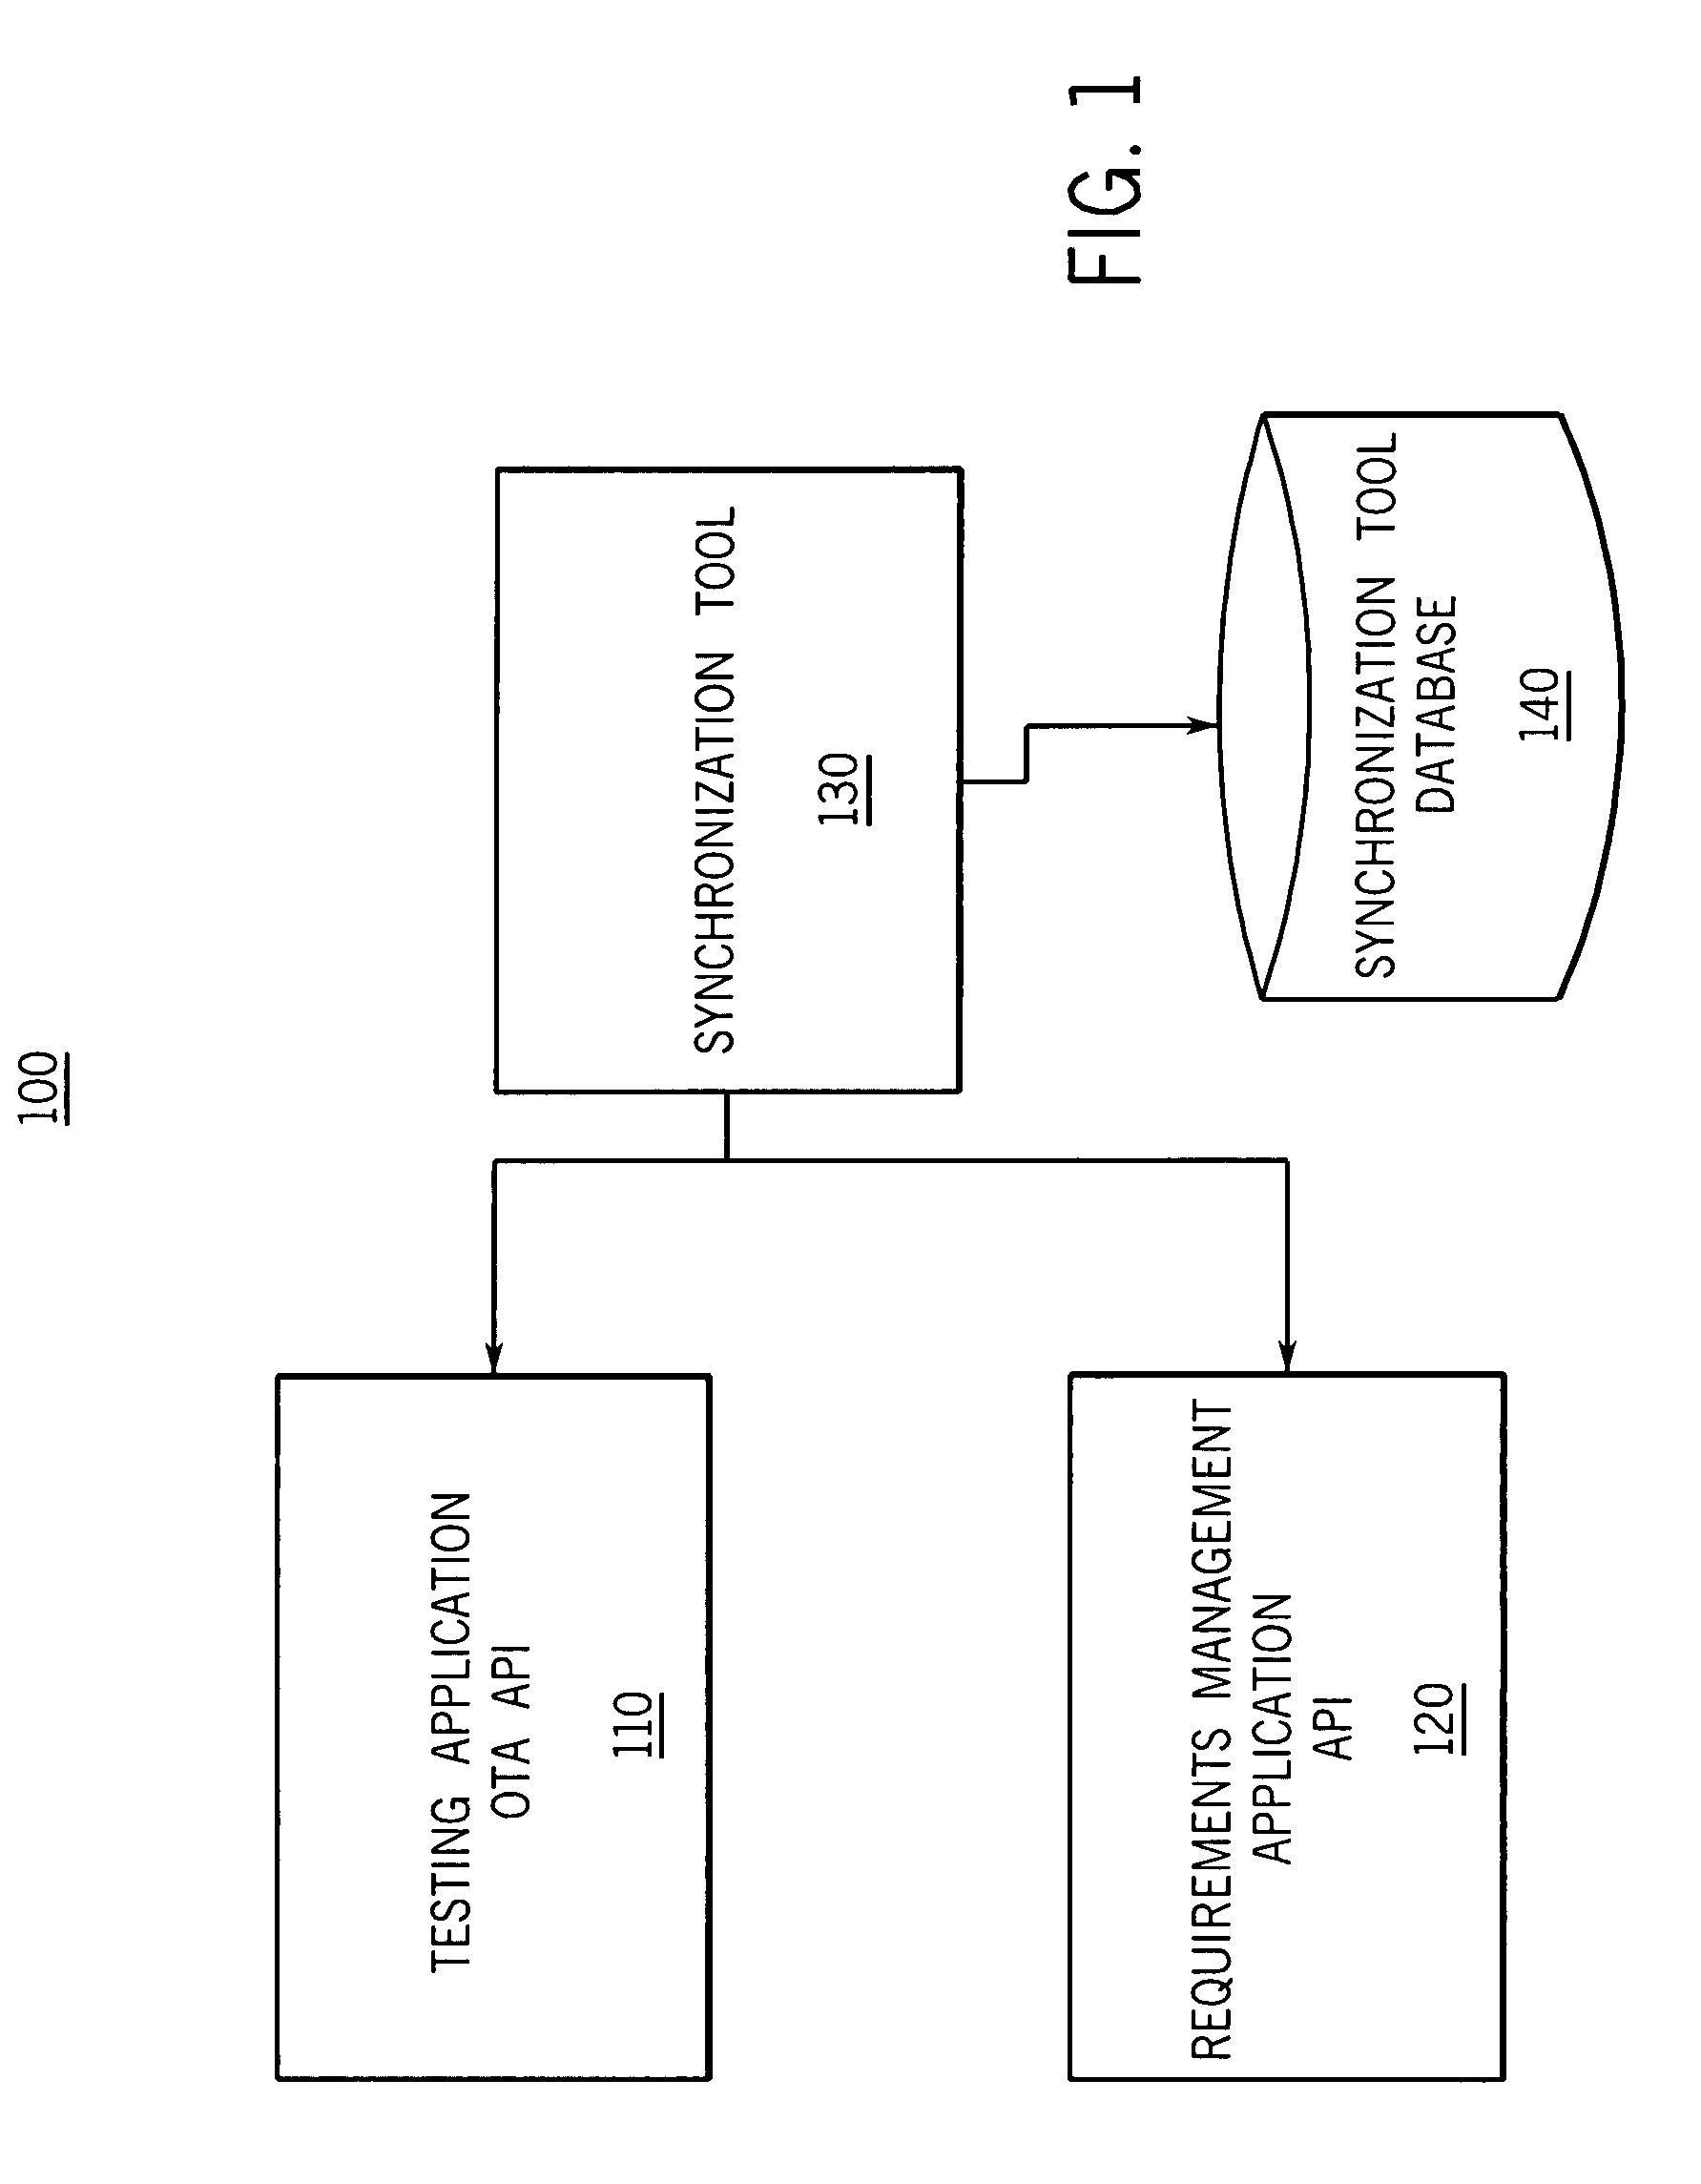 System and method for maintaining requirements traceability